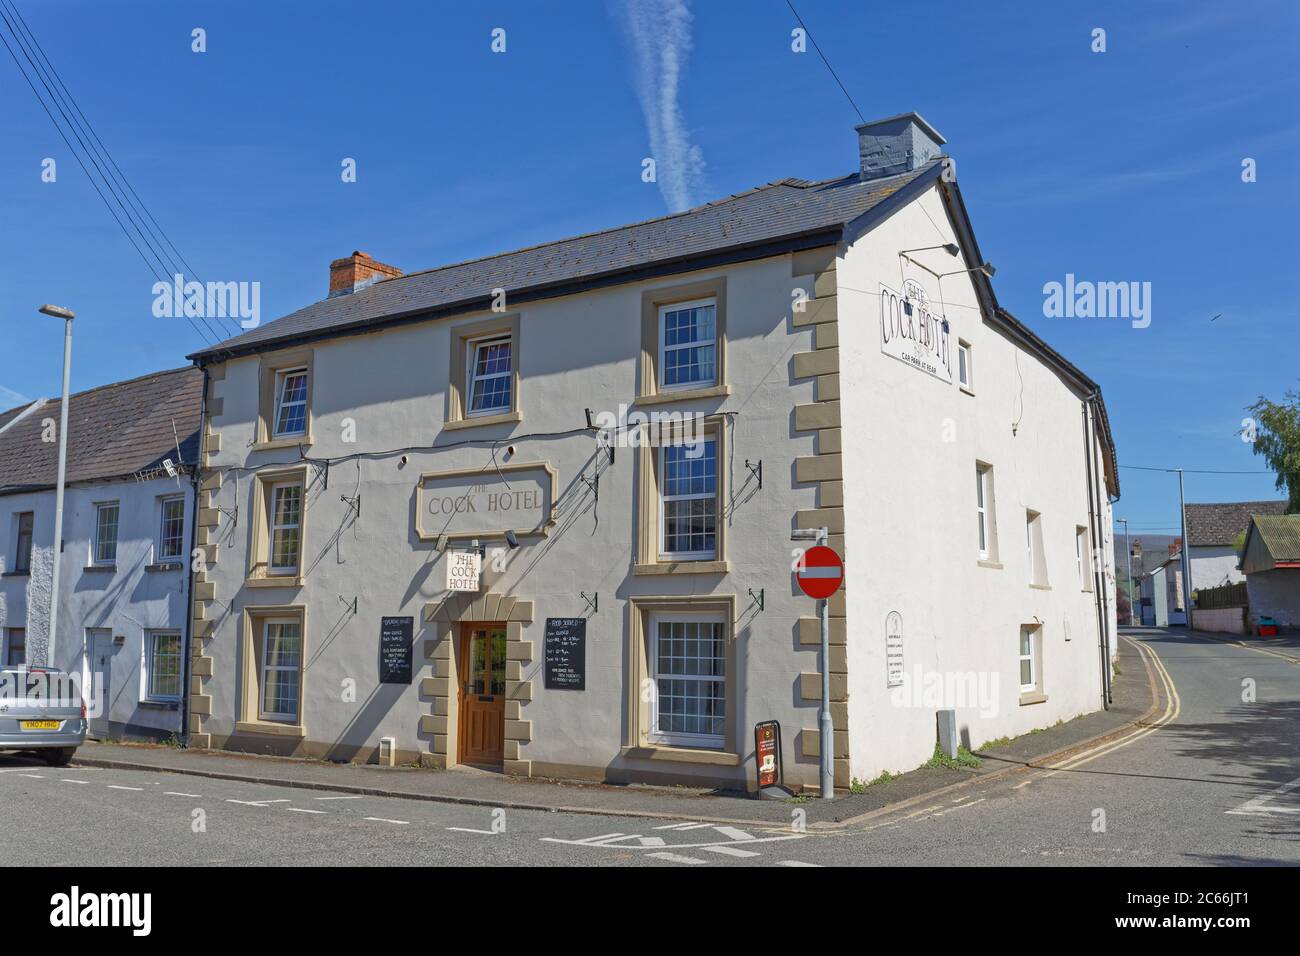 The Cock Hotel in the village of Bronllys in Powys, Wles, UK. Tuesday 19 May 2020 Stock Photo